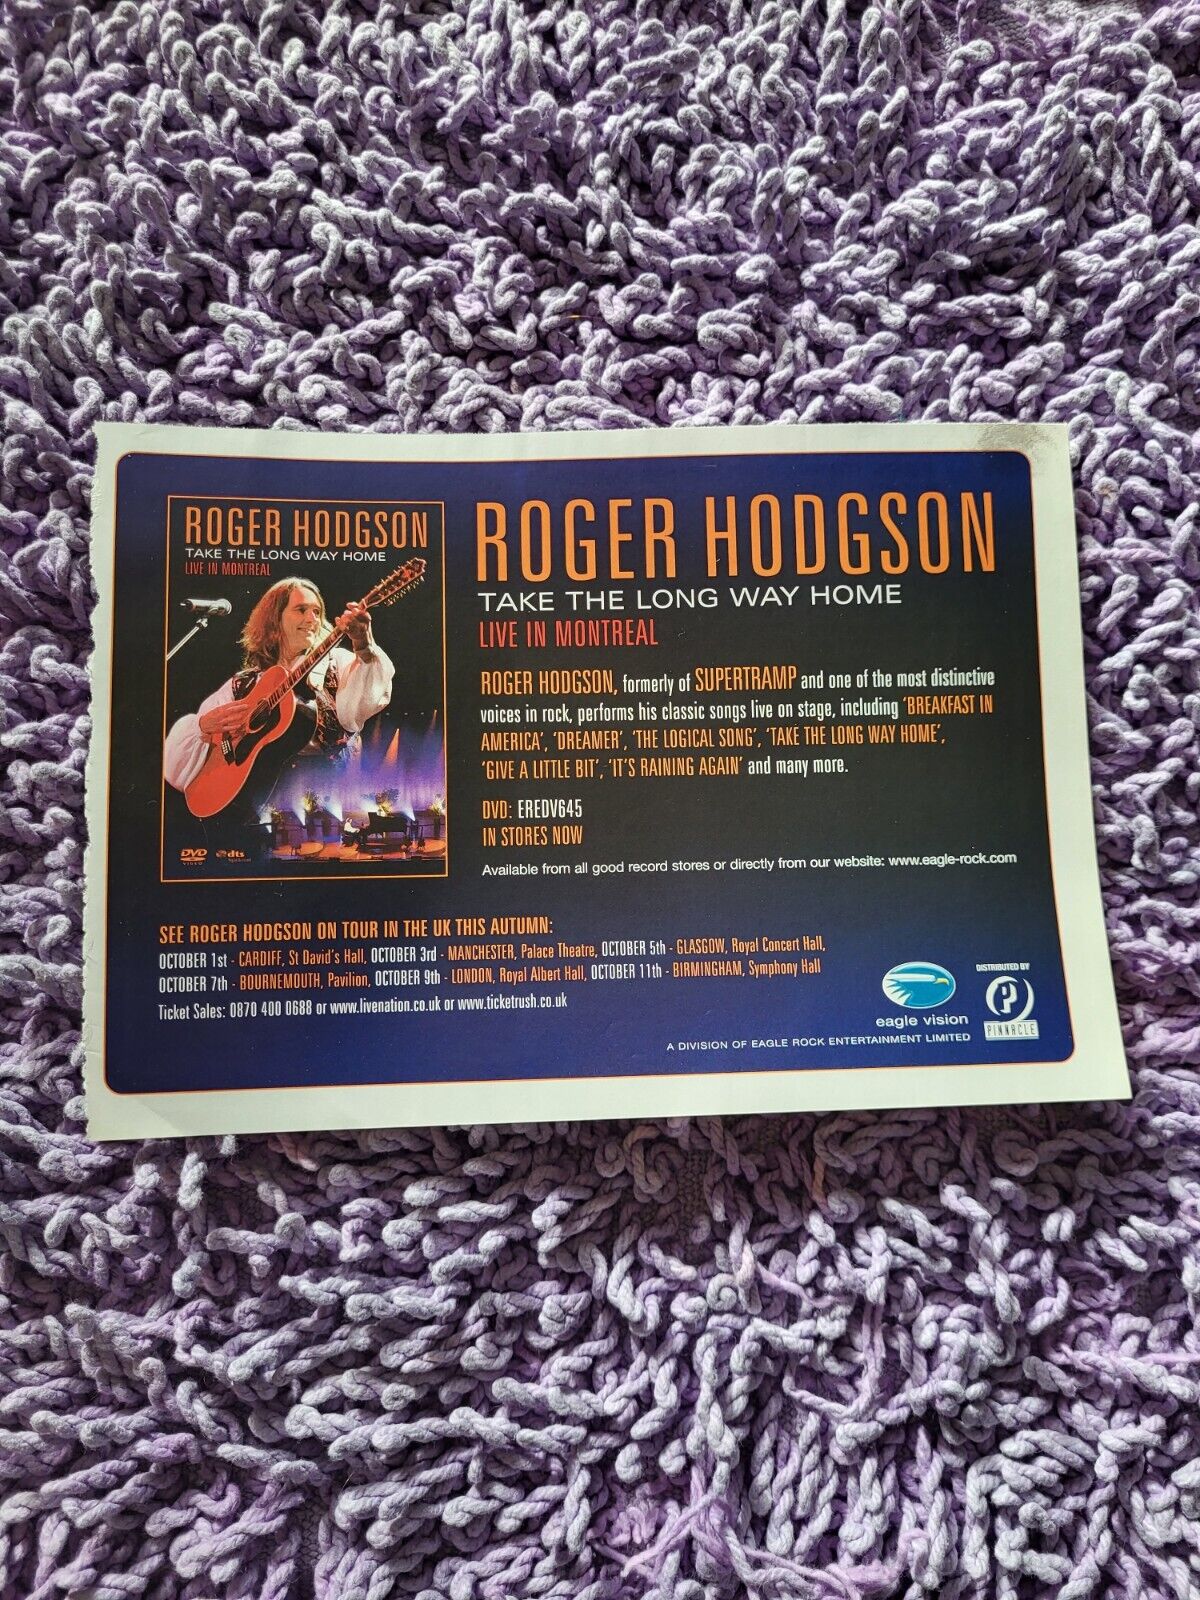 TPGM28 ADVERT 5X8 ROGER HODGSON : \'TAKE THE LONG WAY HOME\' LIVE IN MONTREAL